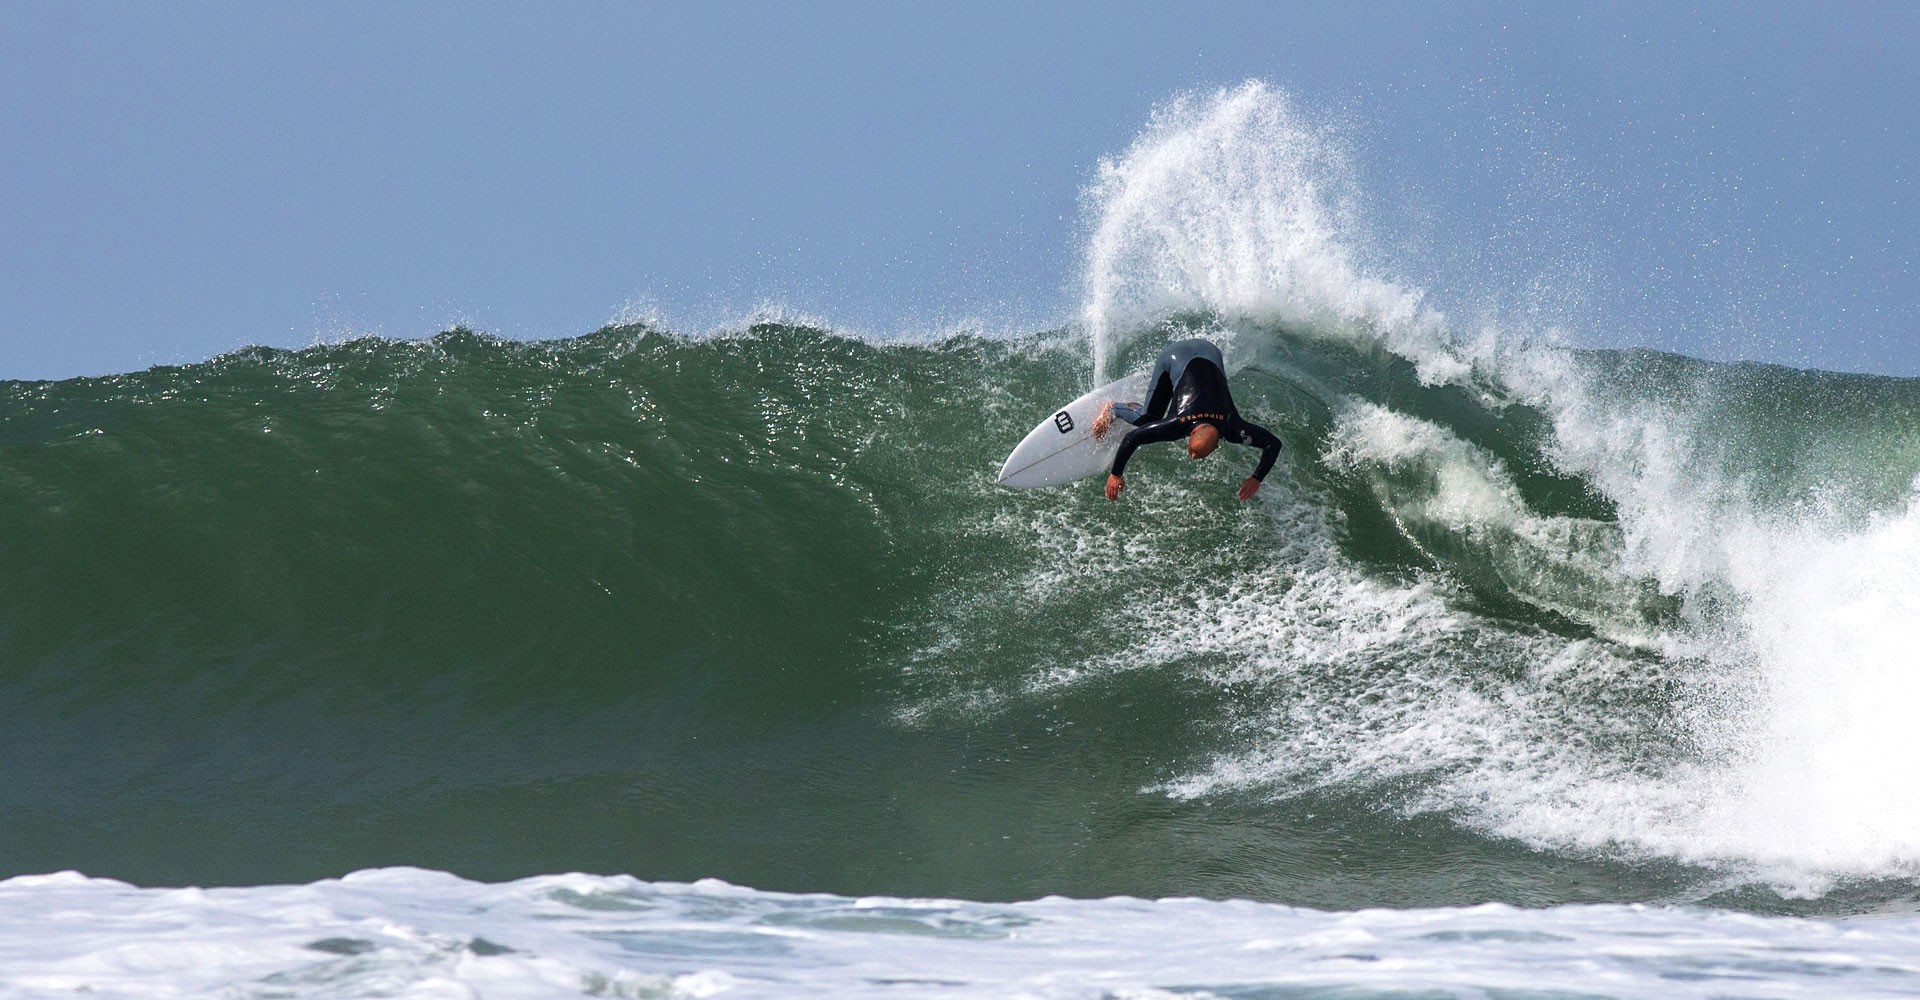 The national and european champion Edgar Nozes is surfing in Coxos, Ericeira, Portugal.